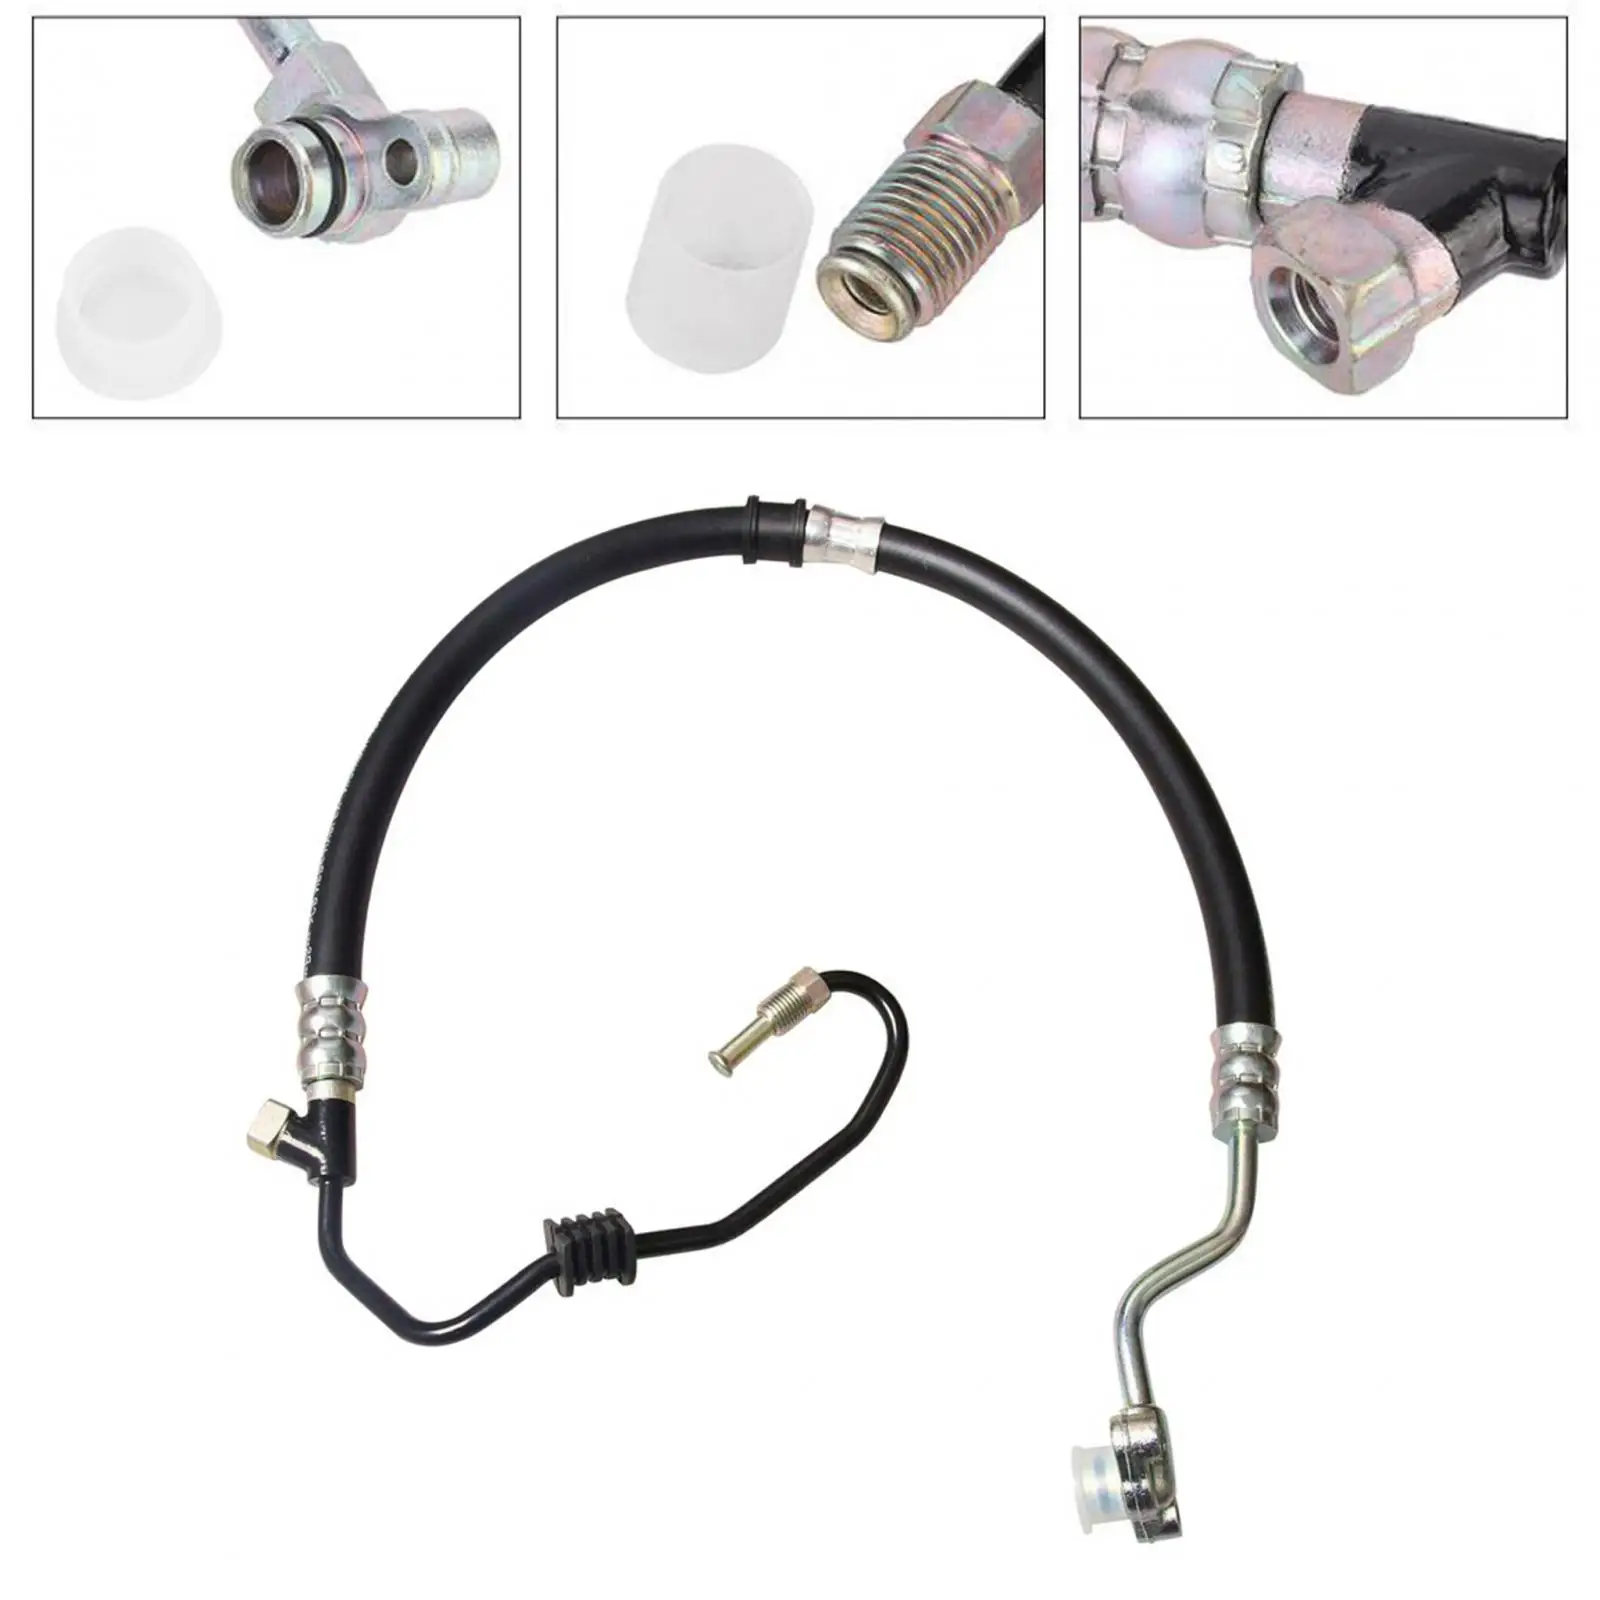 Power Steering Pressure Hose 53713-s84-a04 Durable Professional Accessory Replaces Easy to Install for Honda Accord L4 2.3L